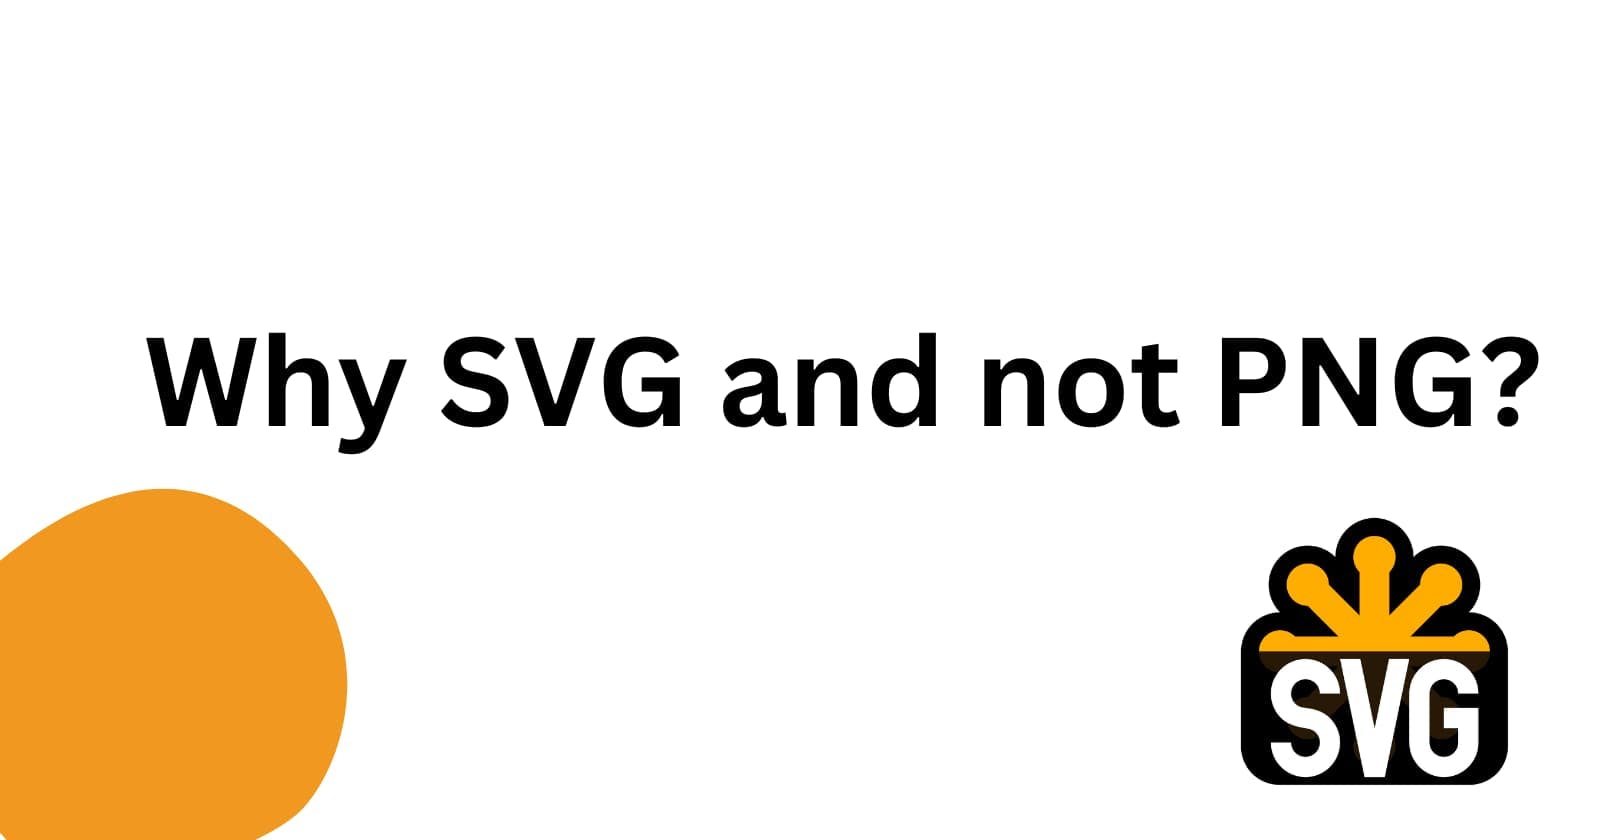 Why SVG and not PNG?